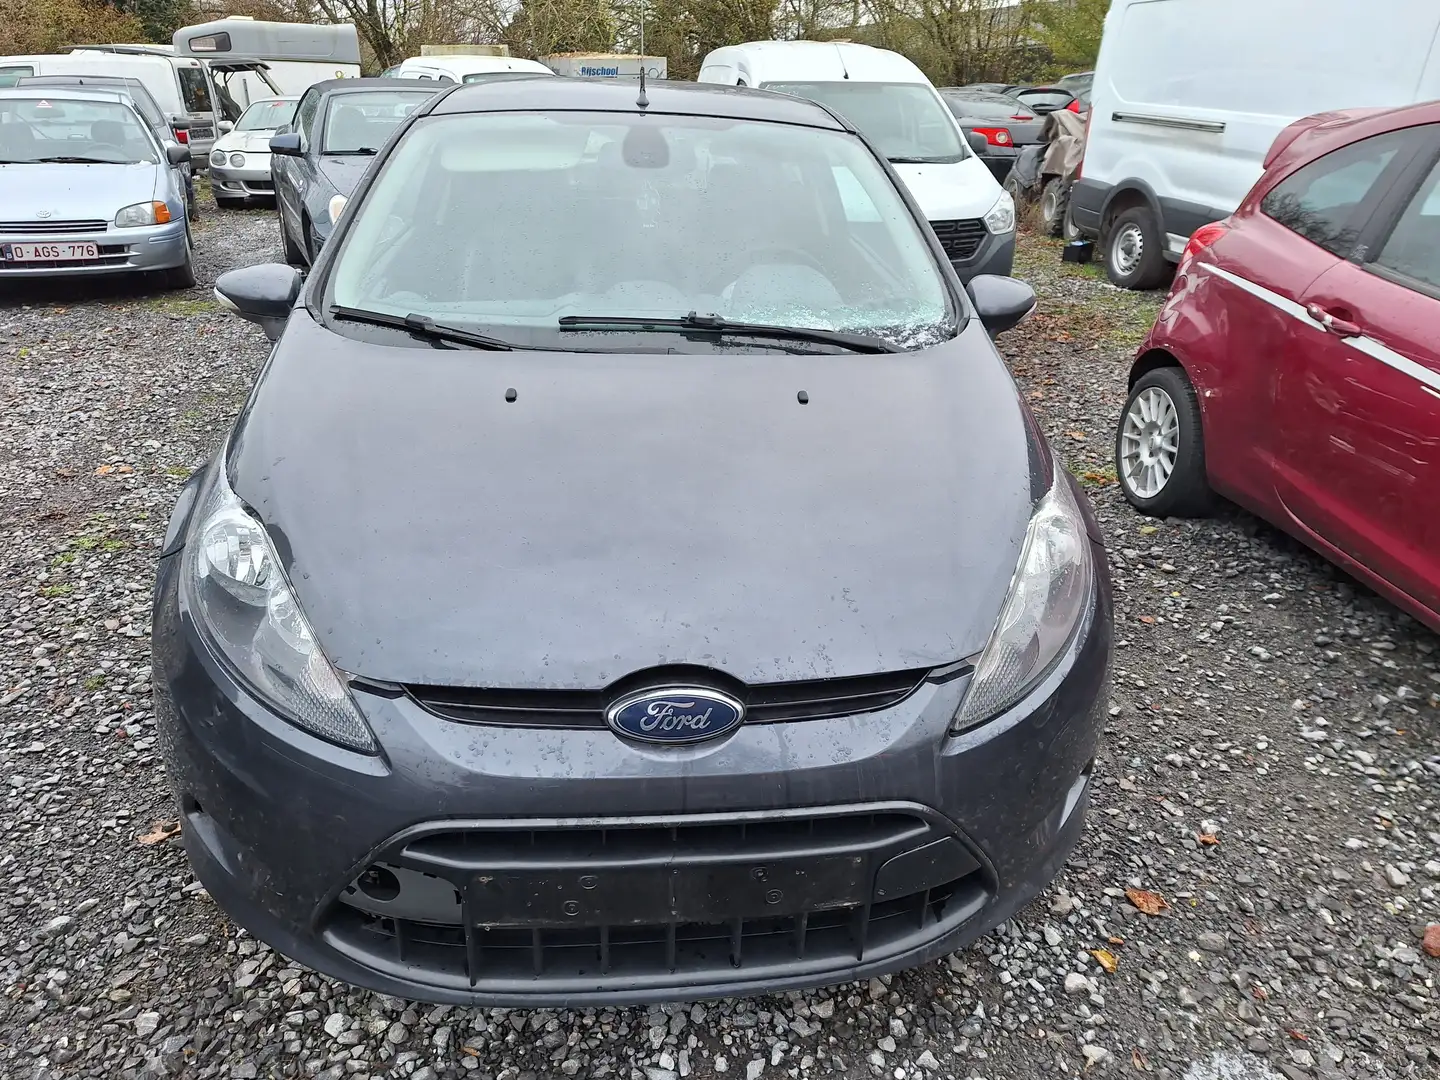 Ford Fiesta EXCL MARCHAND/EXPORT-1560cc-3ptes-Full options Gris - 2